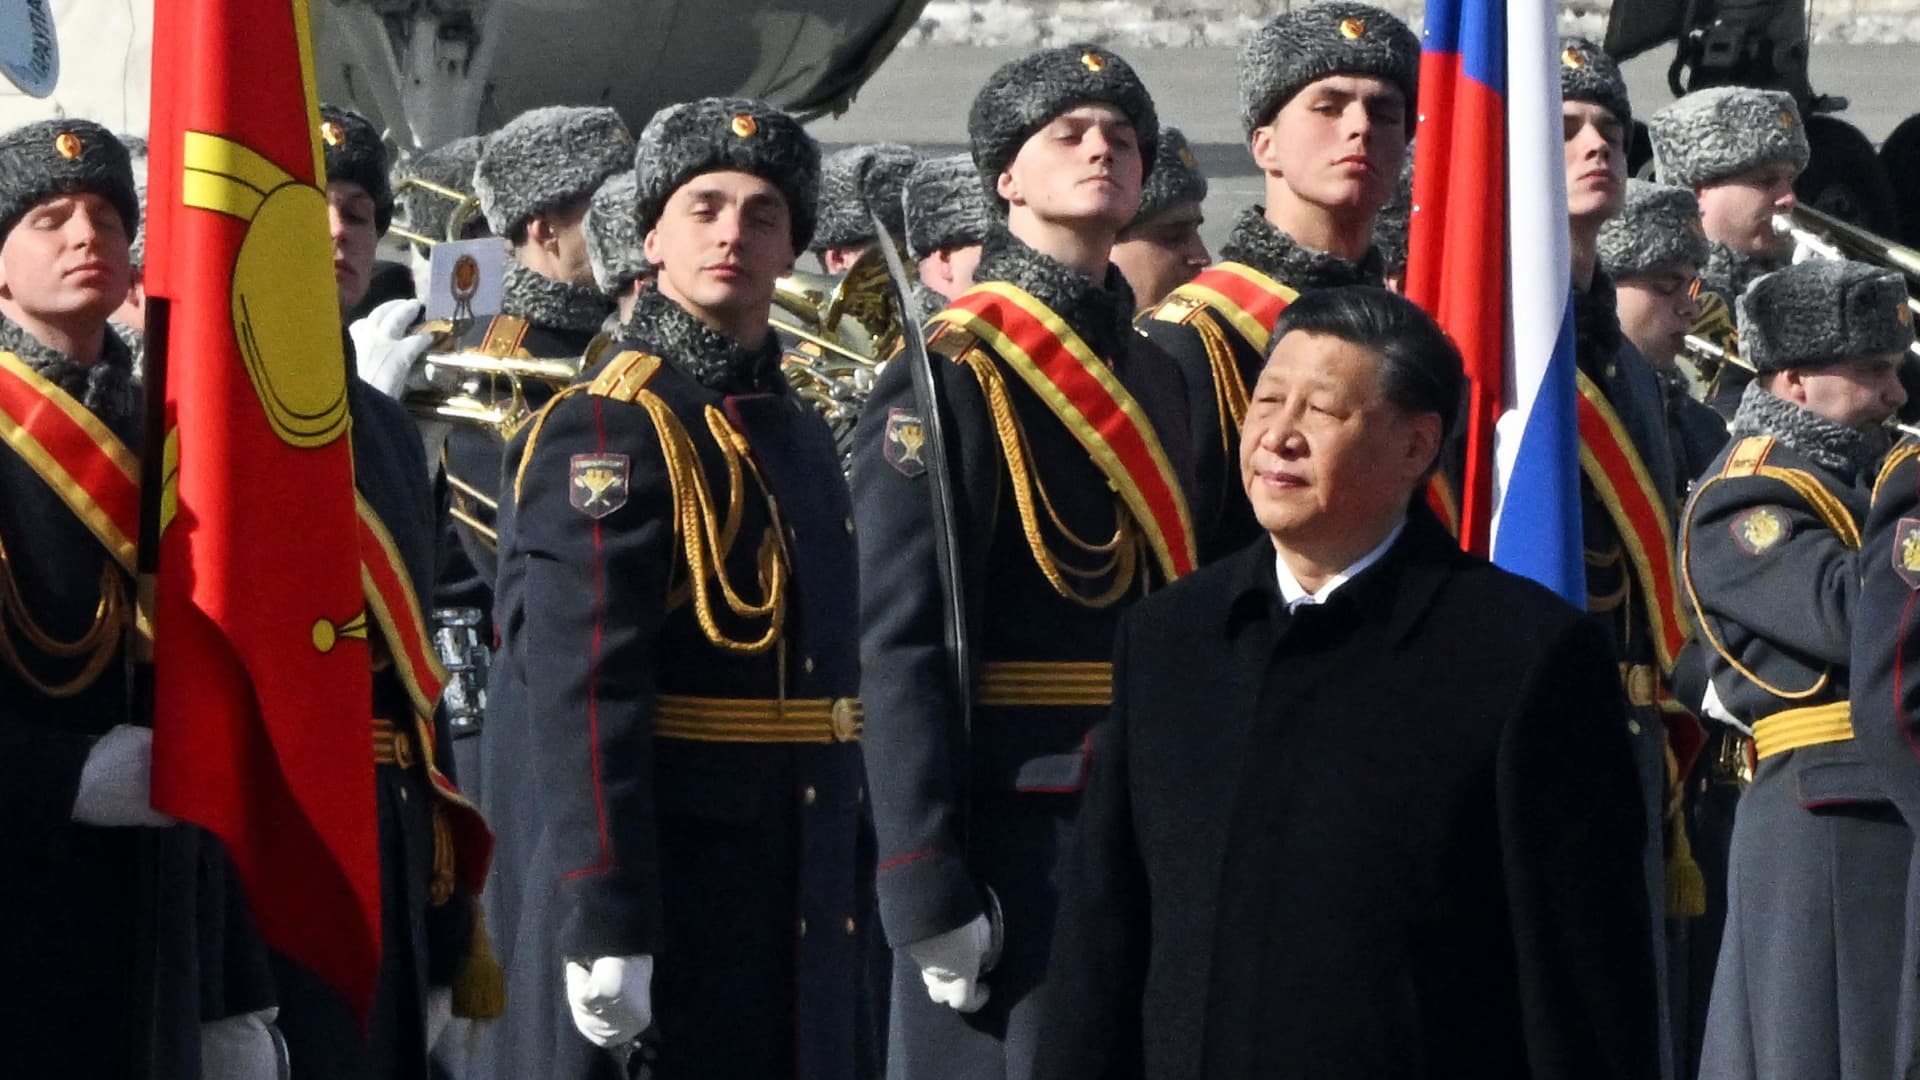 China's President Xi Jinping walks past honour guards during a welcoming ceremony at Moscow's Vnukovo airport on March 20, 2023.